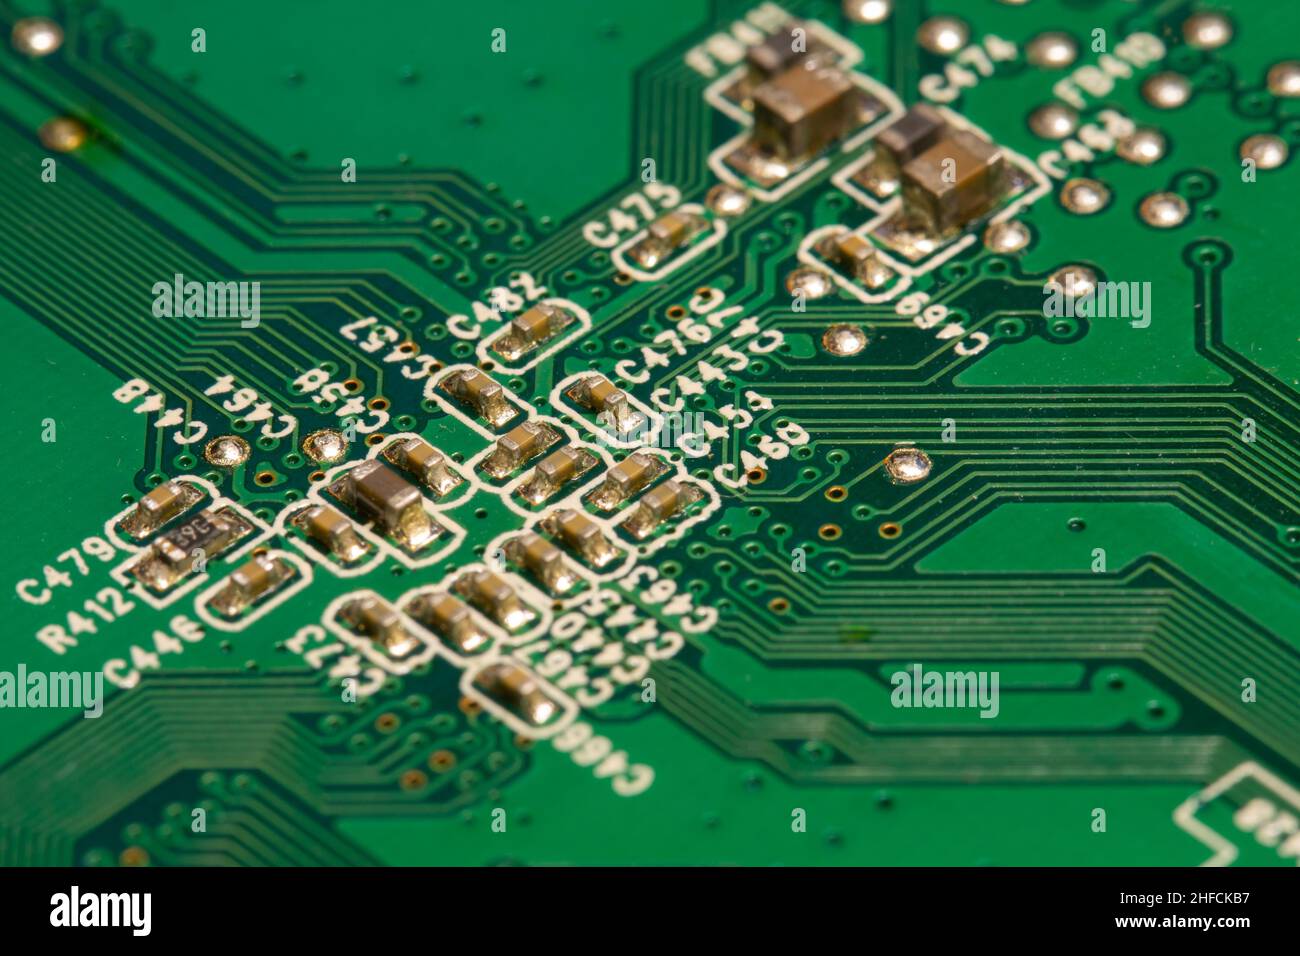 Many small electronic components soldered on green printed circuit board (PCB). Stock Photo